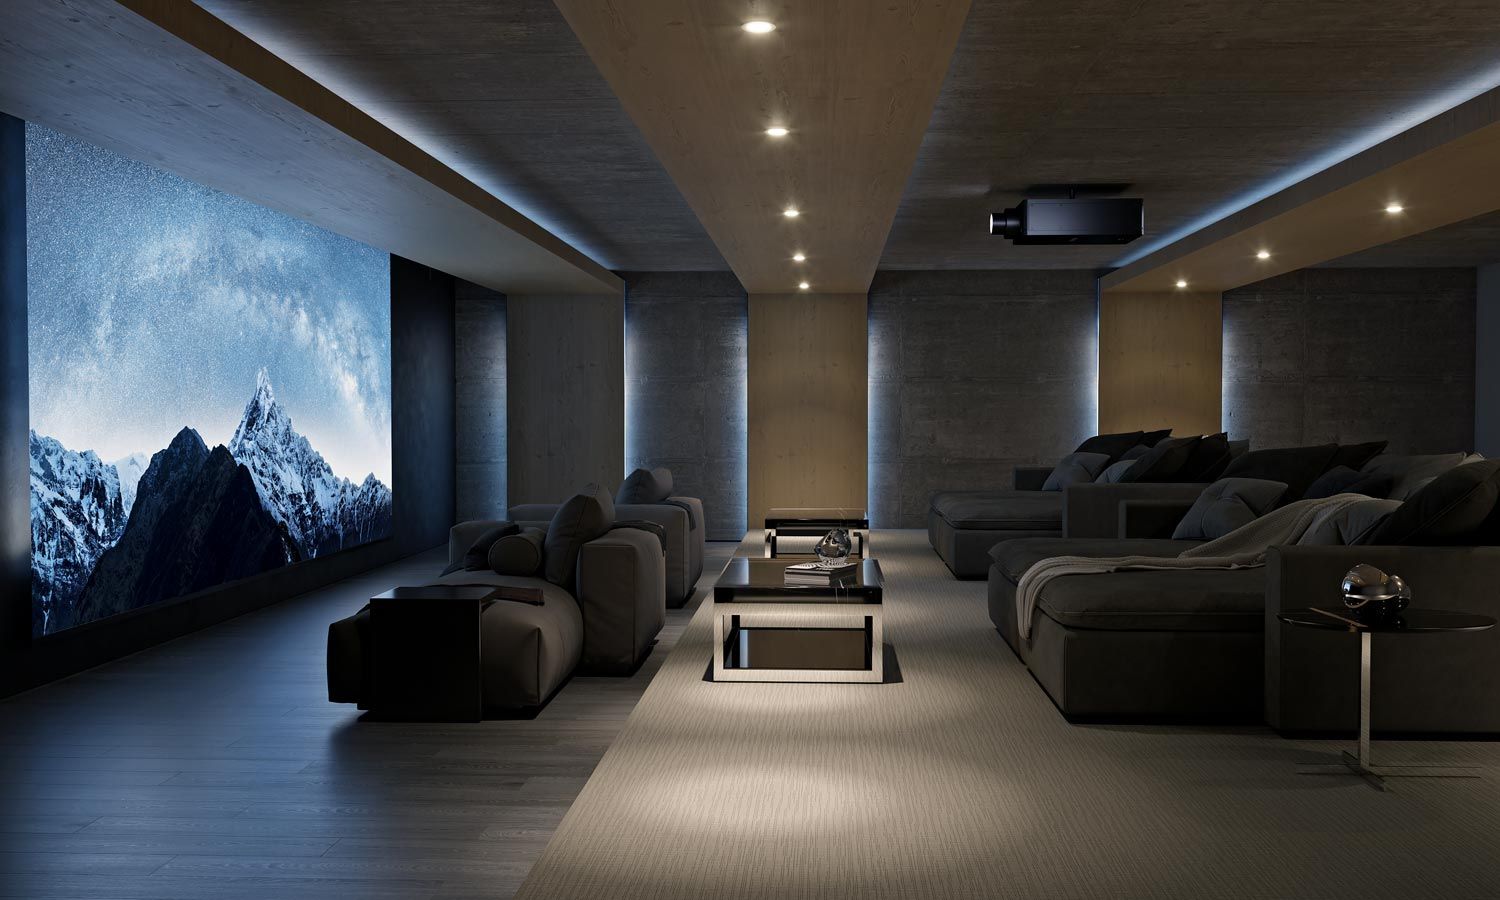 sony technology in a home theater with led lighting and dark chairs